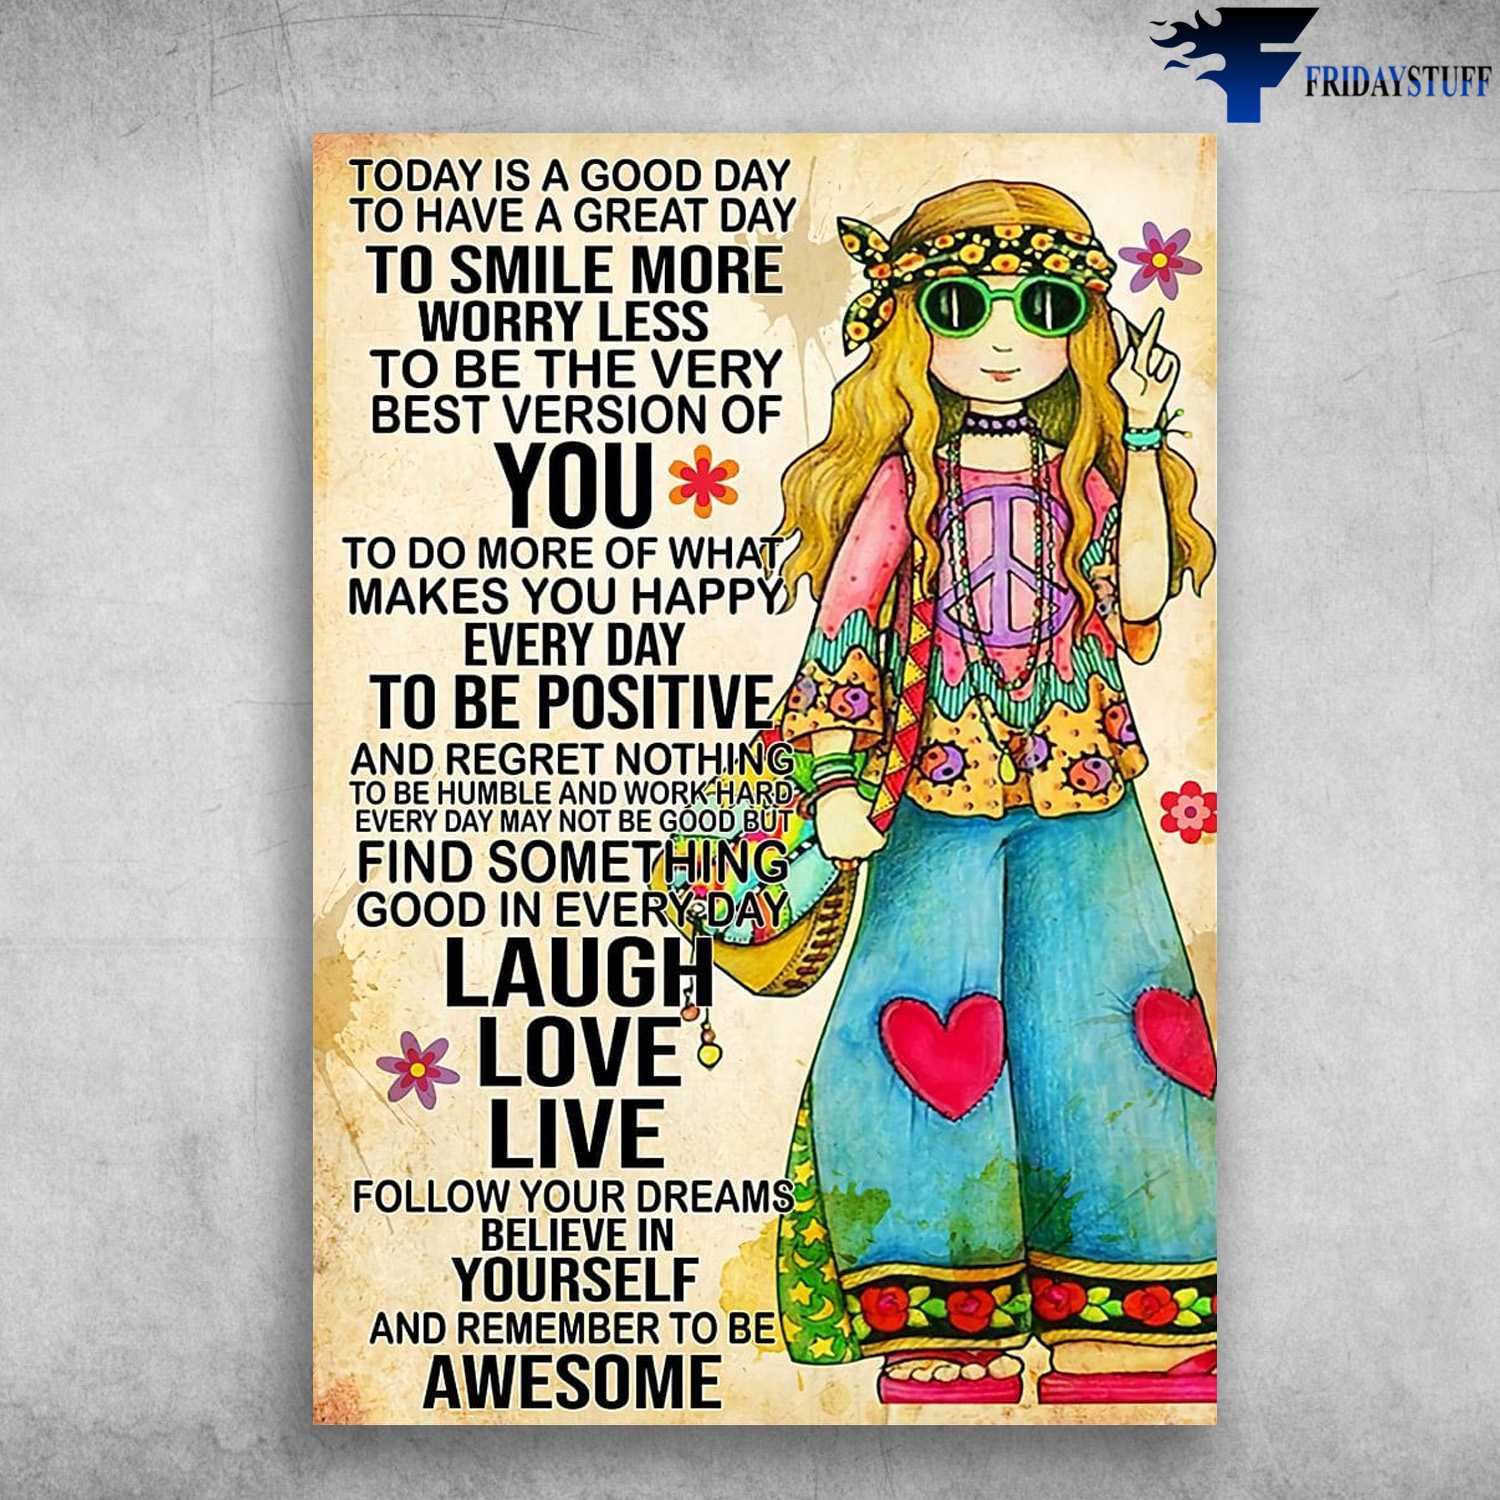 Hippie Girl, aHippie Poster, Today Is A Good Day, To Have A Great Day, To Smile More Worry Less, To Be The Very Best Version Of You, To Do More Of What Makes You Happy Everyday